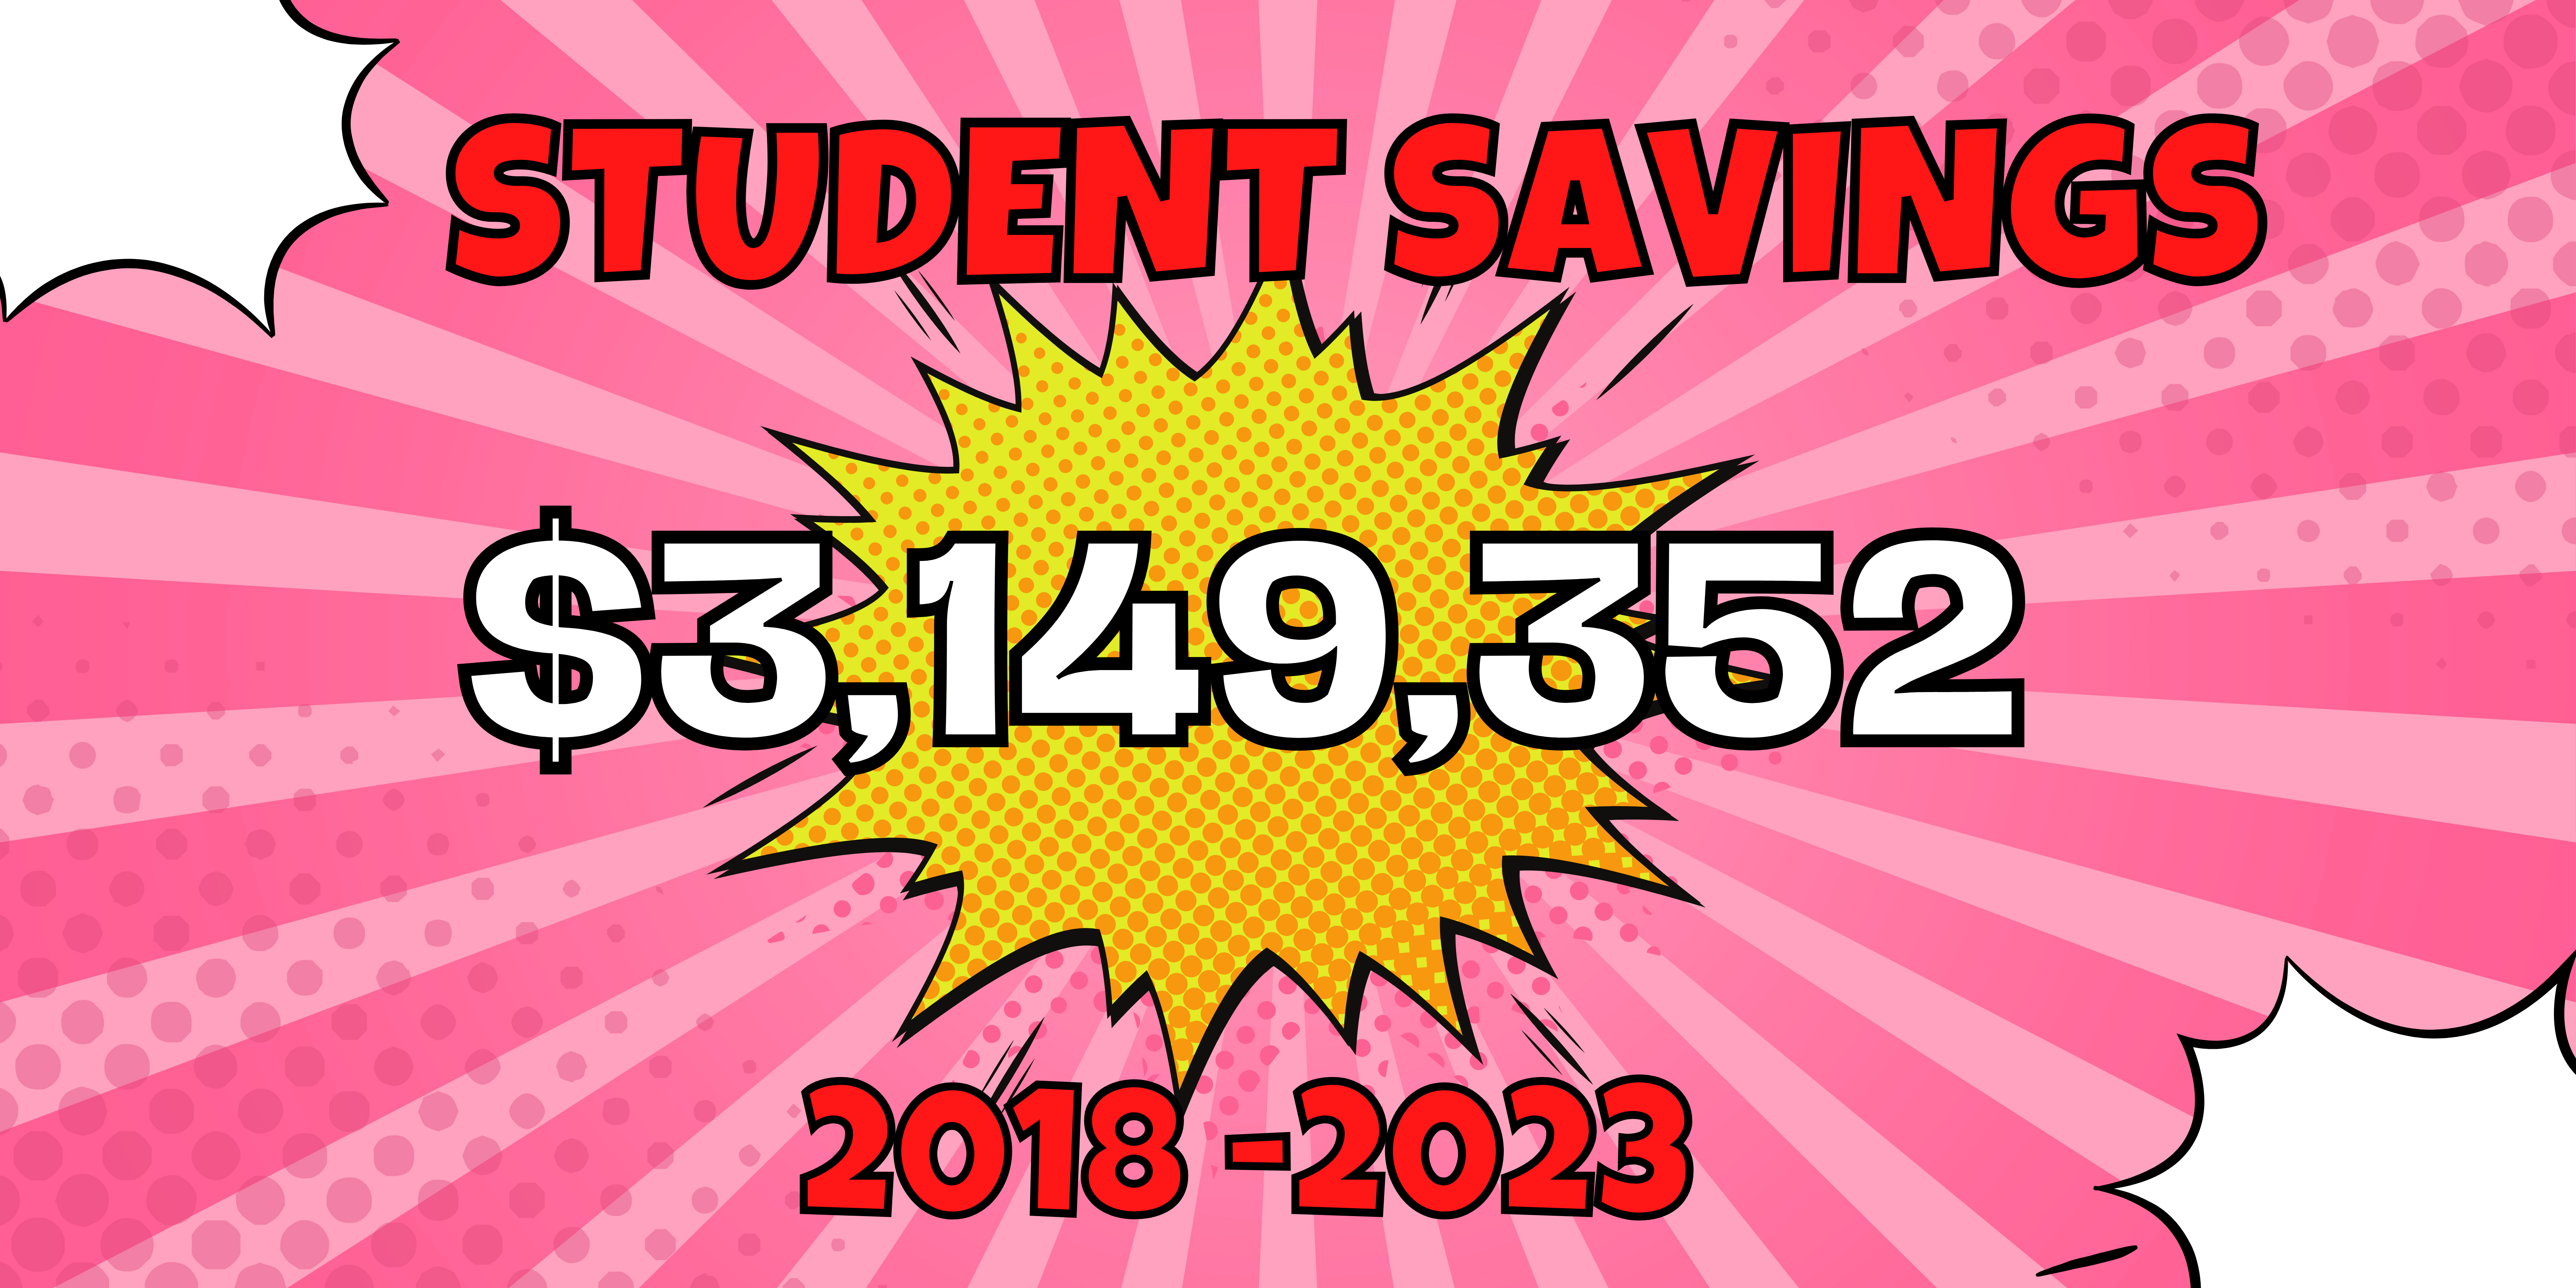 Student Savings $3,149,352 during the years 2018 and 2023